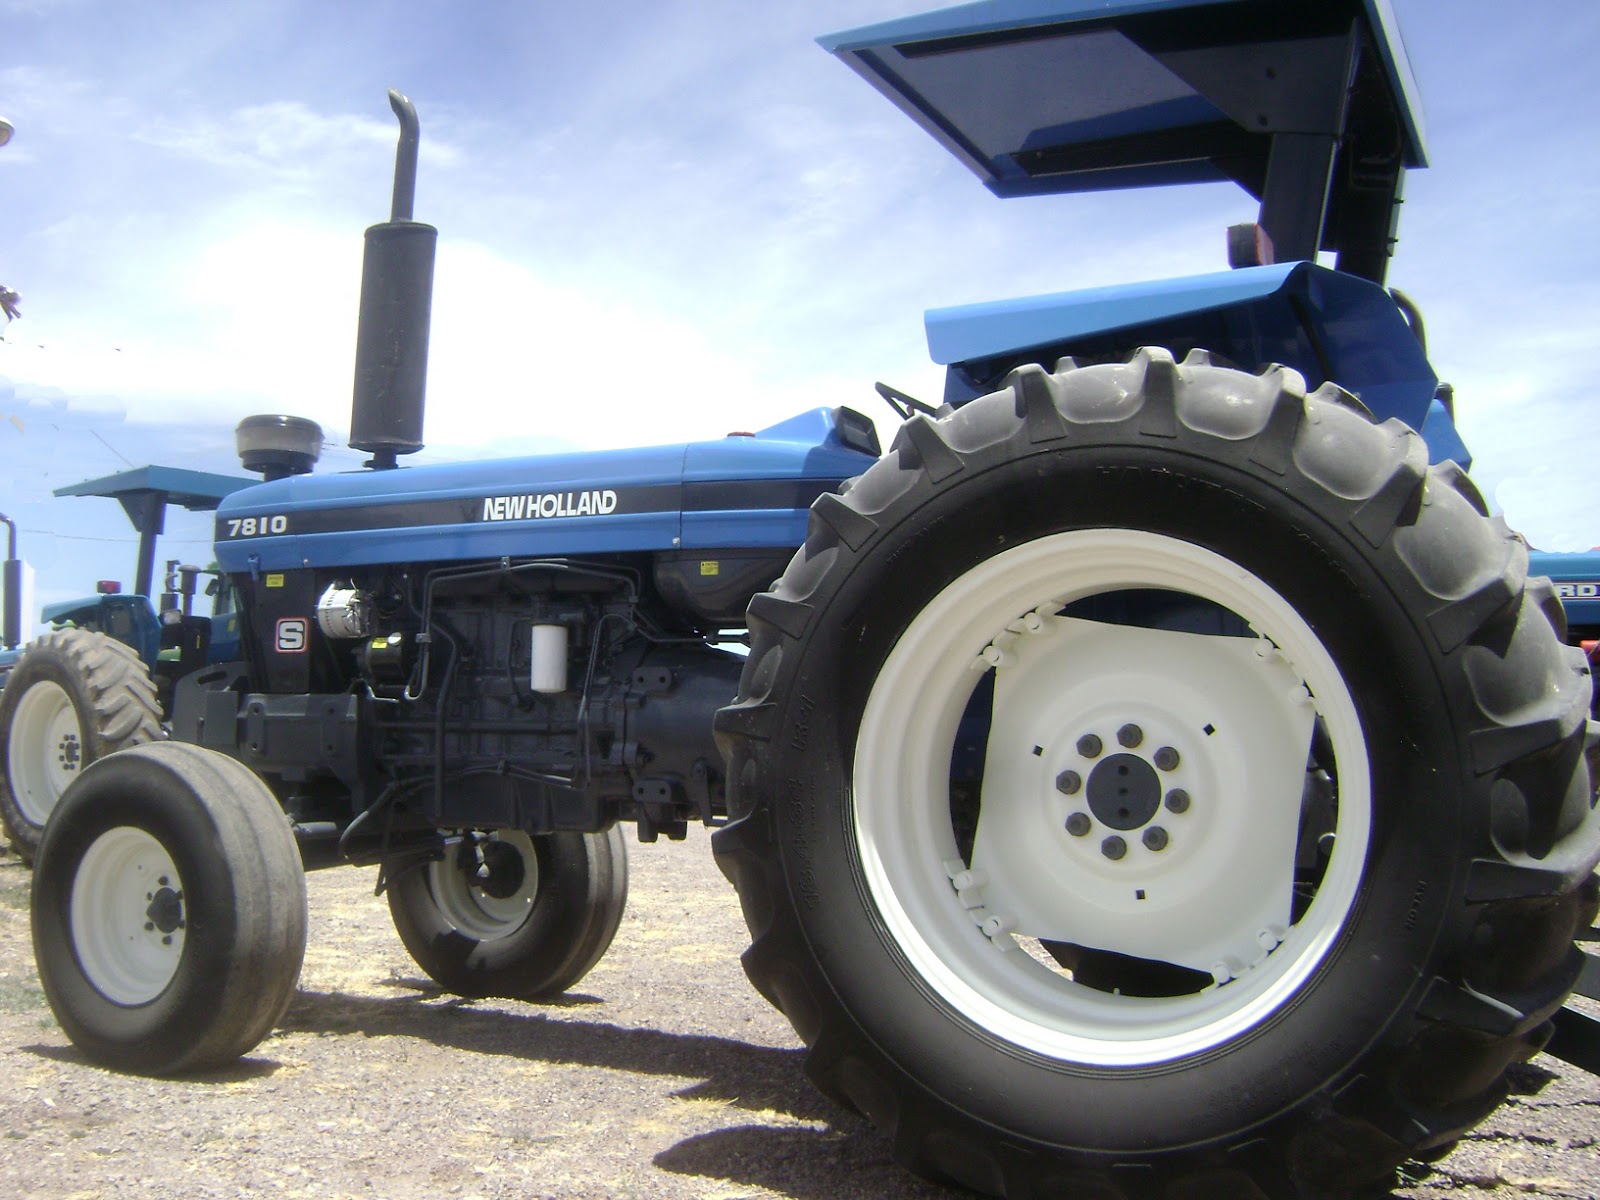 MAQUINARIA AGRICOLA INDUSTRIAL: Tractor Ford New Holland 7810, 105hp ...